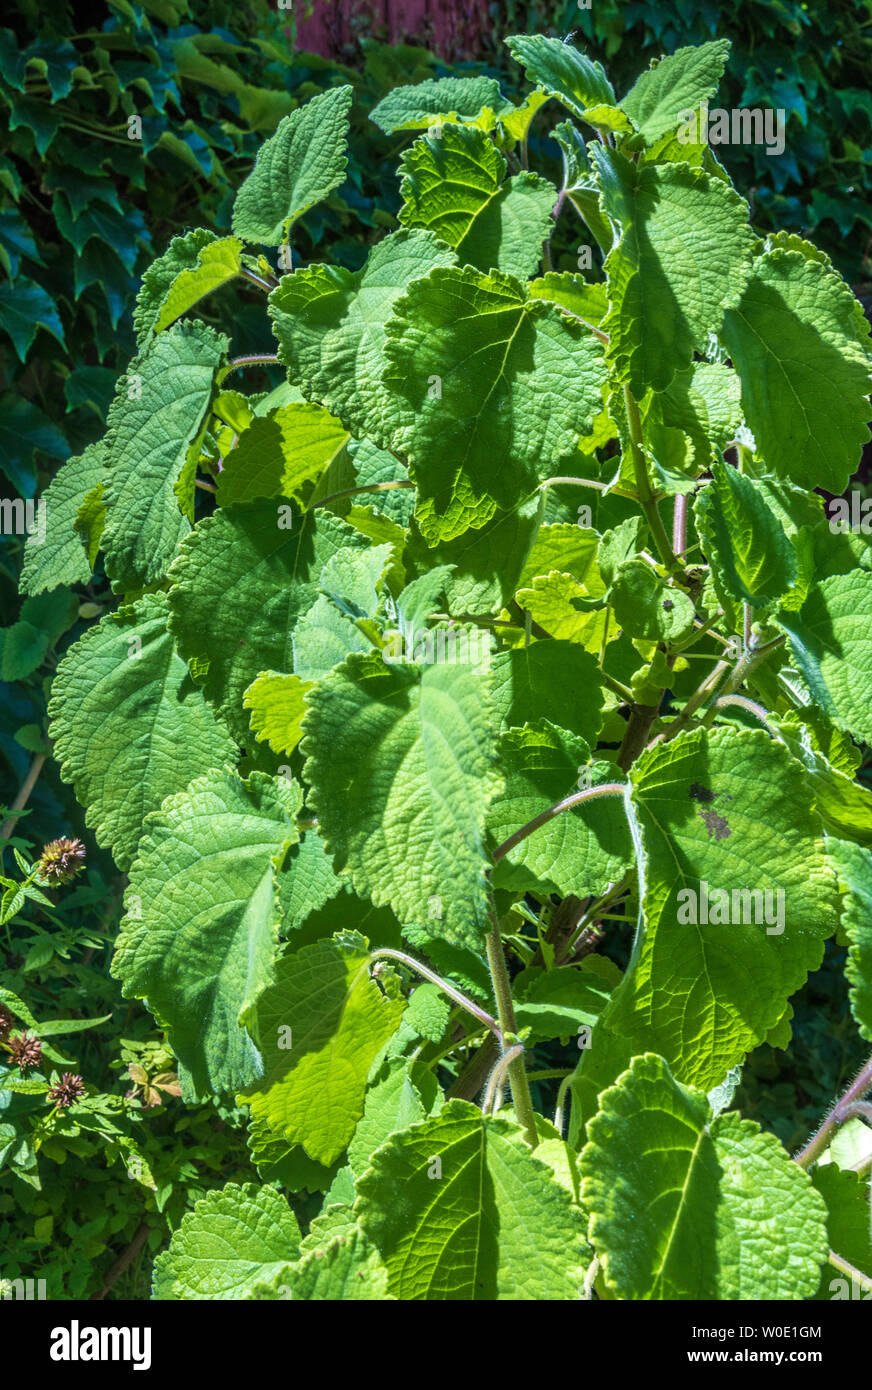 France, Gironde, green house tropical plant, Patchouli Stock Photo